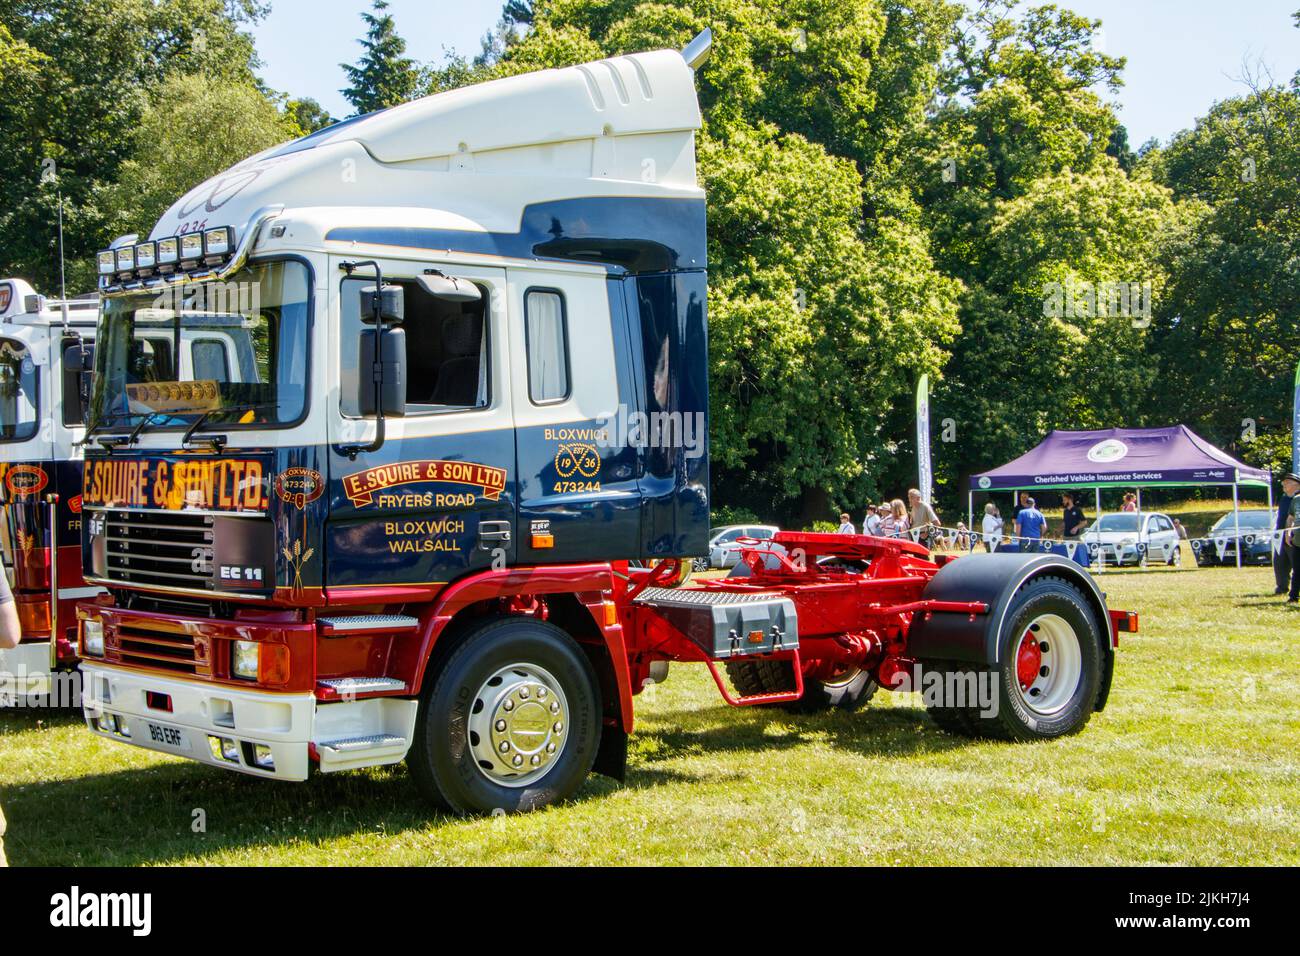 E Squire and sone livery of vintage ERF truck lorry cab at weston park classic car show Stock Photo